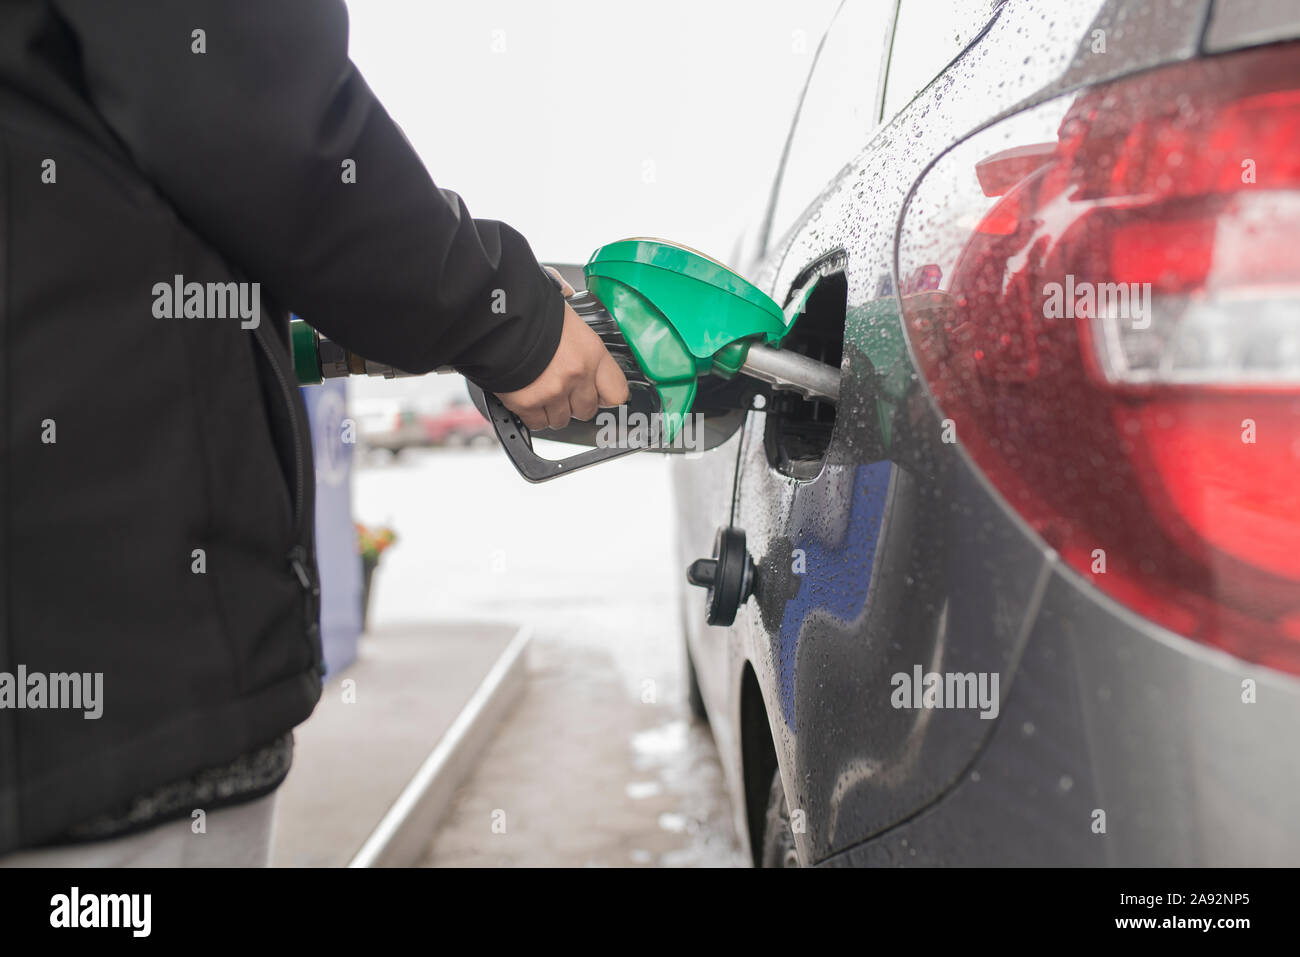 Hand holding fuel nozzle in car Stock Photo